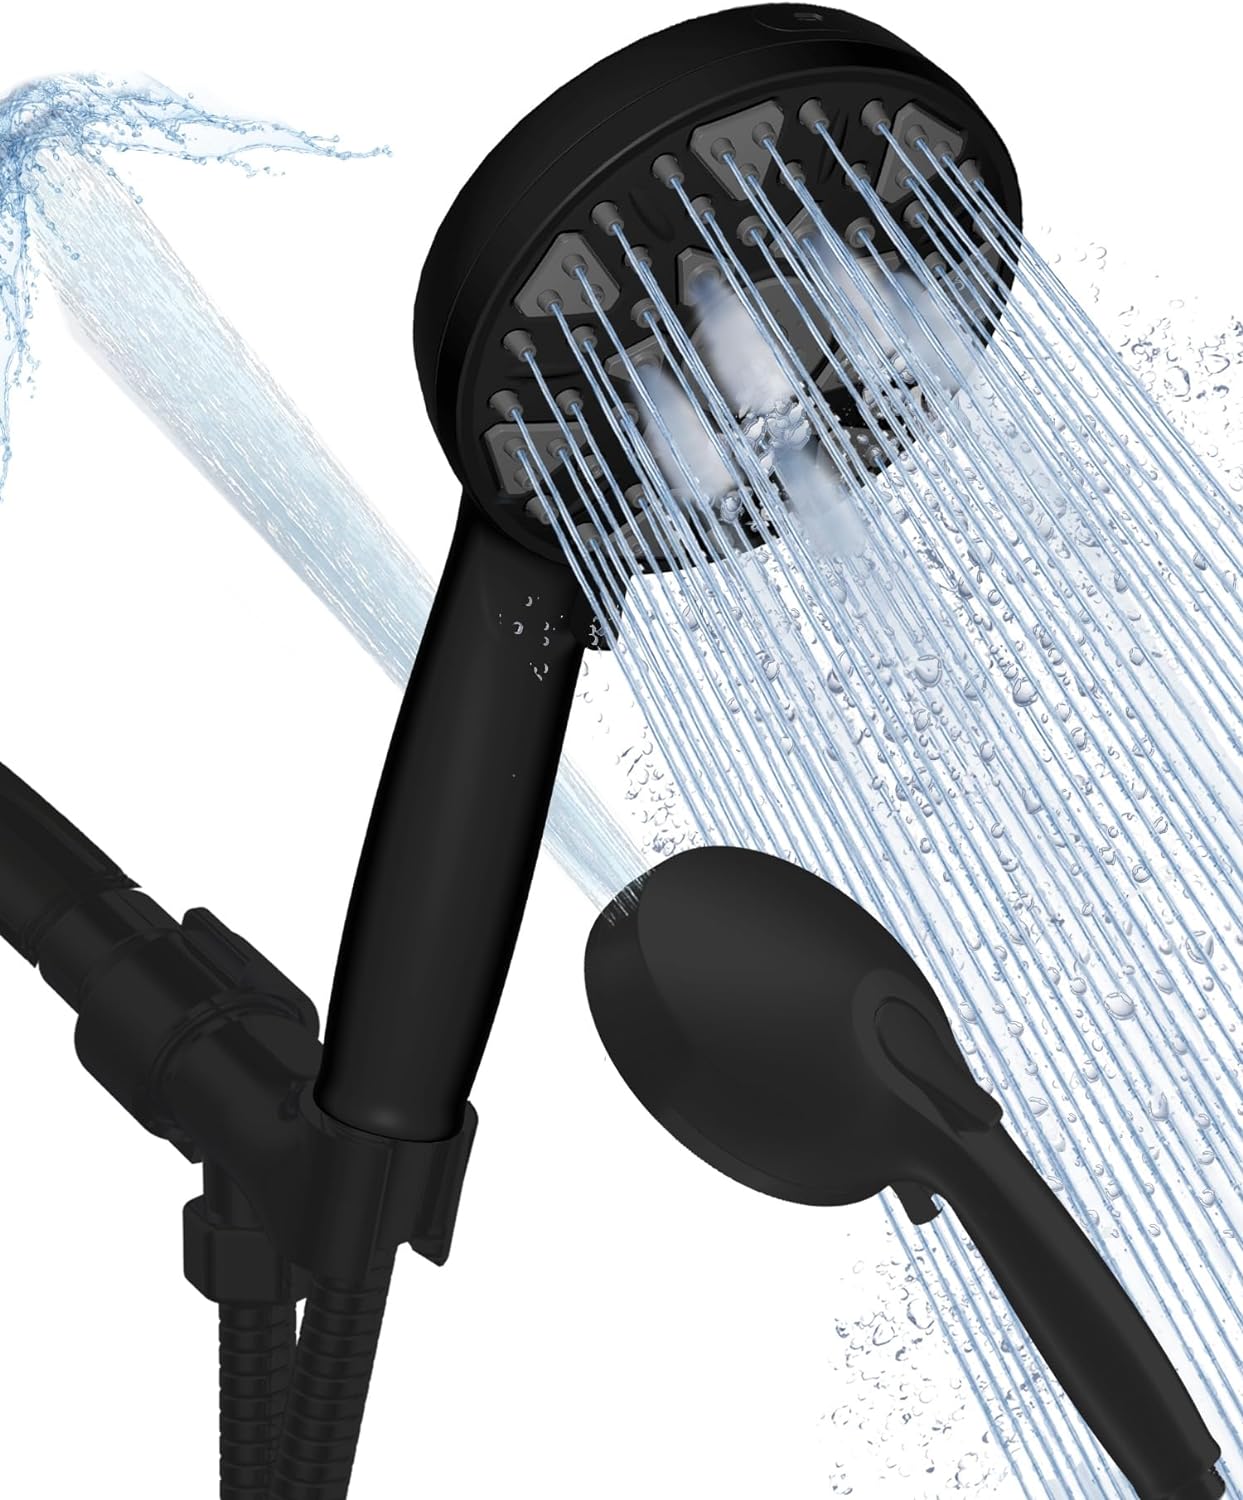 BOWGER Shower Head with Handheld High Pressure Multi-Function 7 modes, Built-in Power Wash to Clear Tub, Tile  Pets, 5” High Flow Hand Held Rain Showerhead with Extra Long Hose and Adjustable Bracket